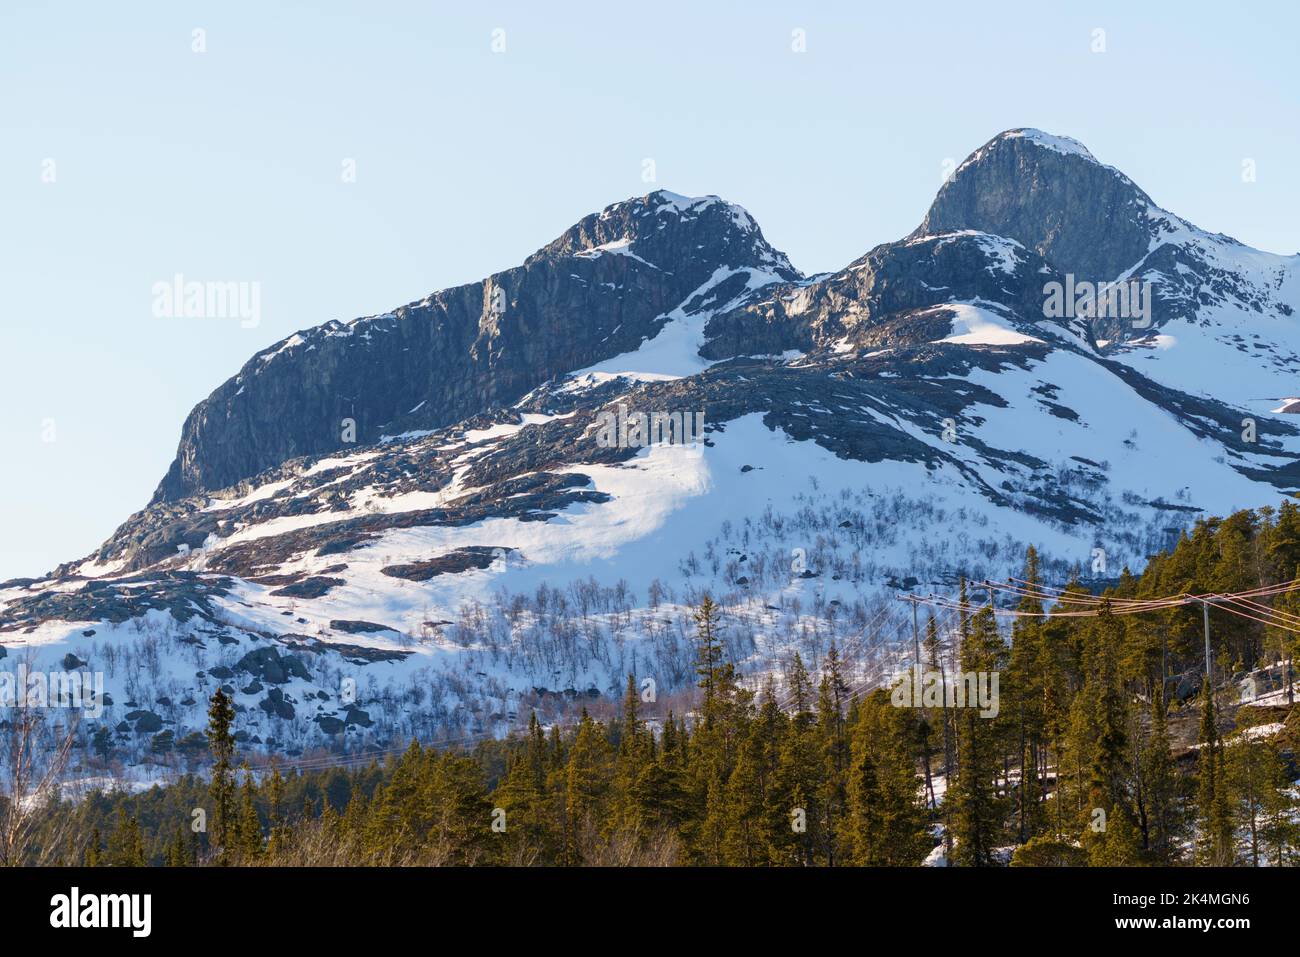 Snowy landscape in spring time with mountains in background, Stora sjöfallets nationalpark, Laponia world heritage, Swedish Lapland, Sweden. Stock Photo